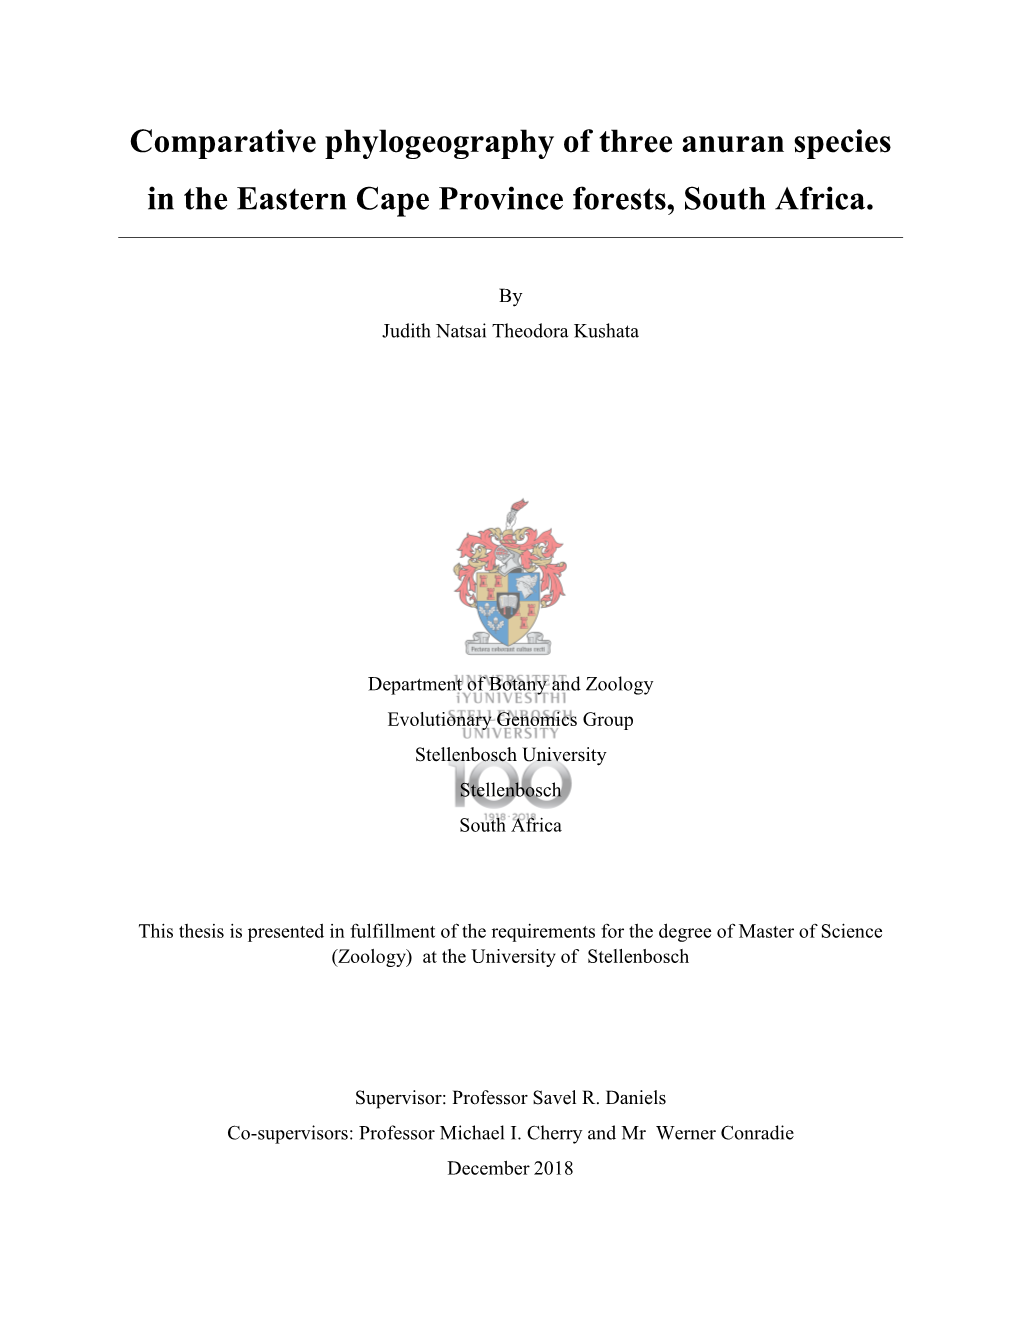 Comparative Phylogeography of Three Anuran Species in the Eastern Cape Province Forests, South Africa